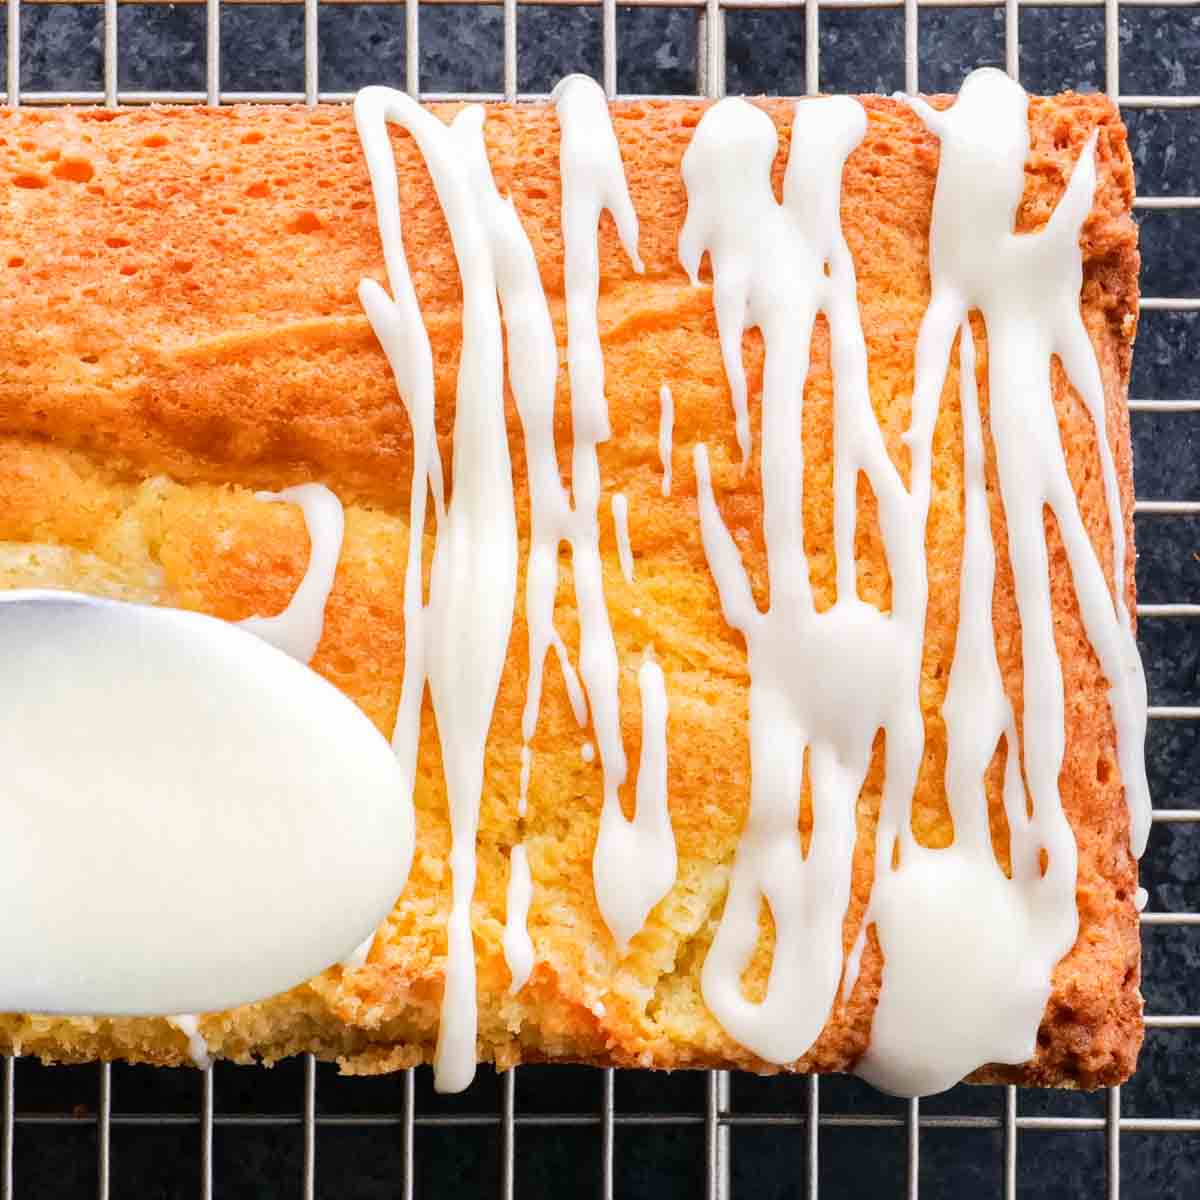 A lemon loaf cake with icing and a spoon on a cooling rack.